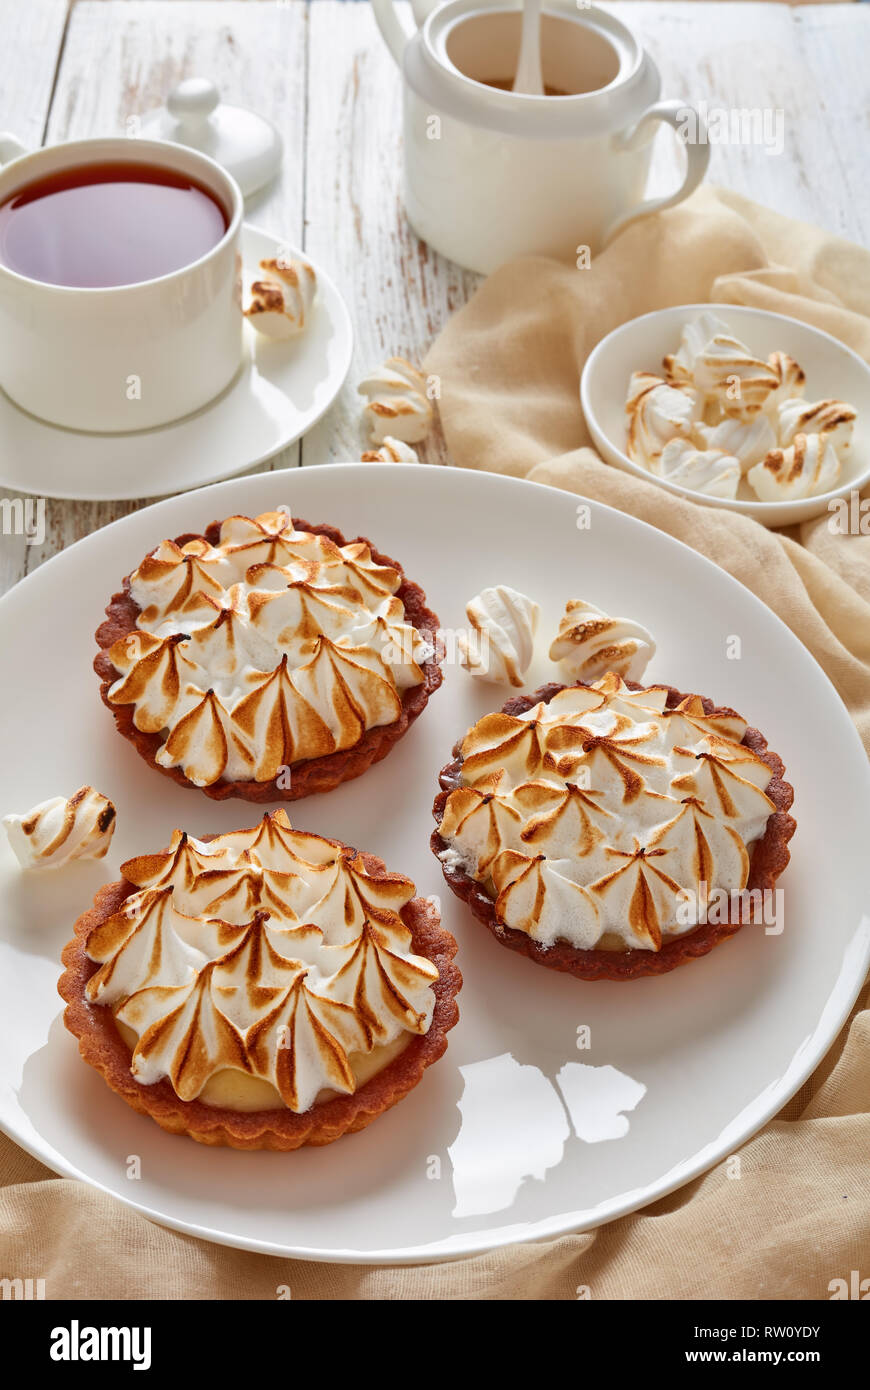 close-up of Lemon meringue mini pies with browned meringue peaks served with tea, mini marshmallows and brown organic sugar on wooden table with light Stock Photo